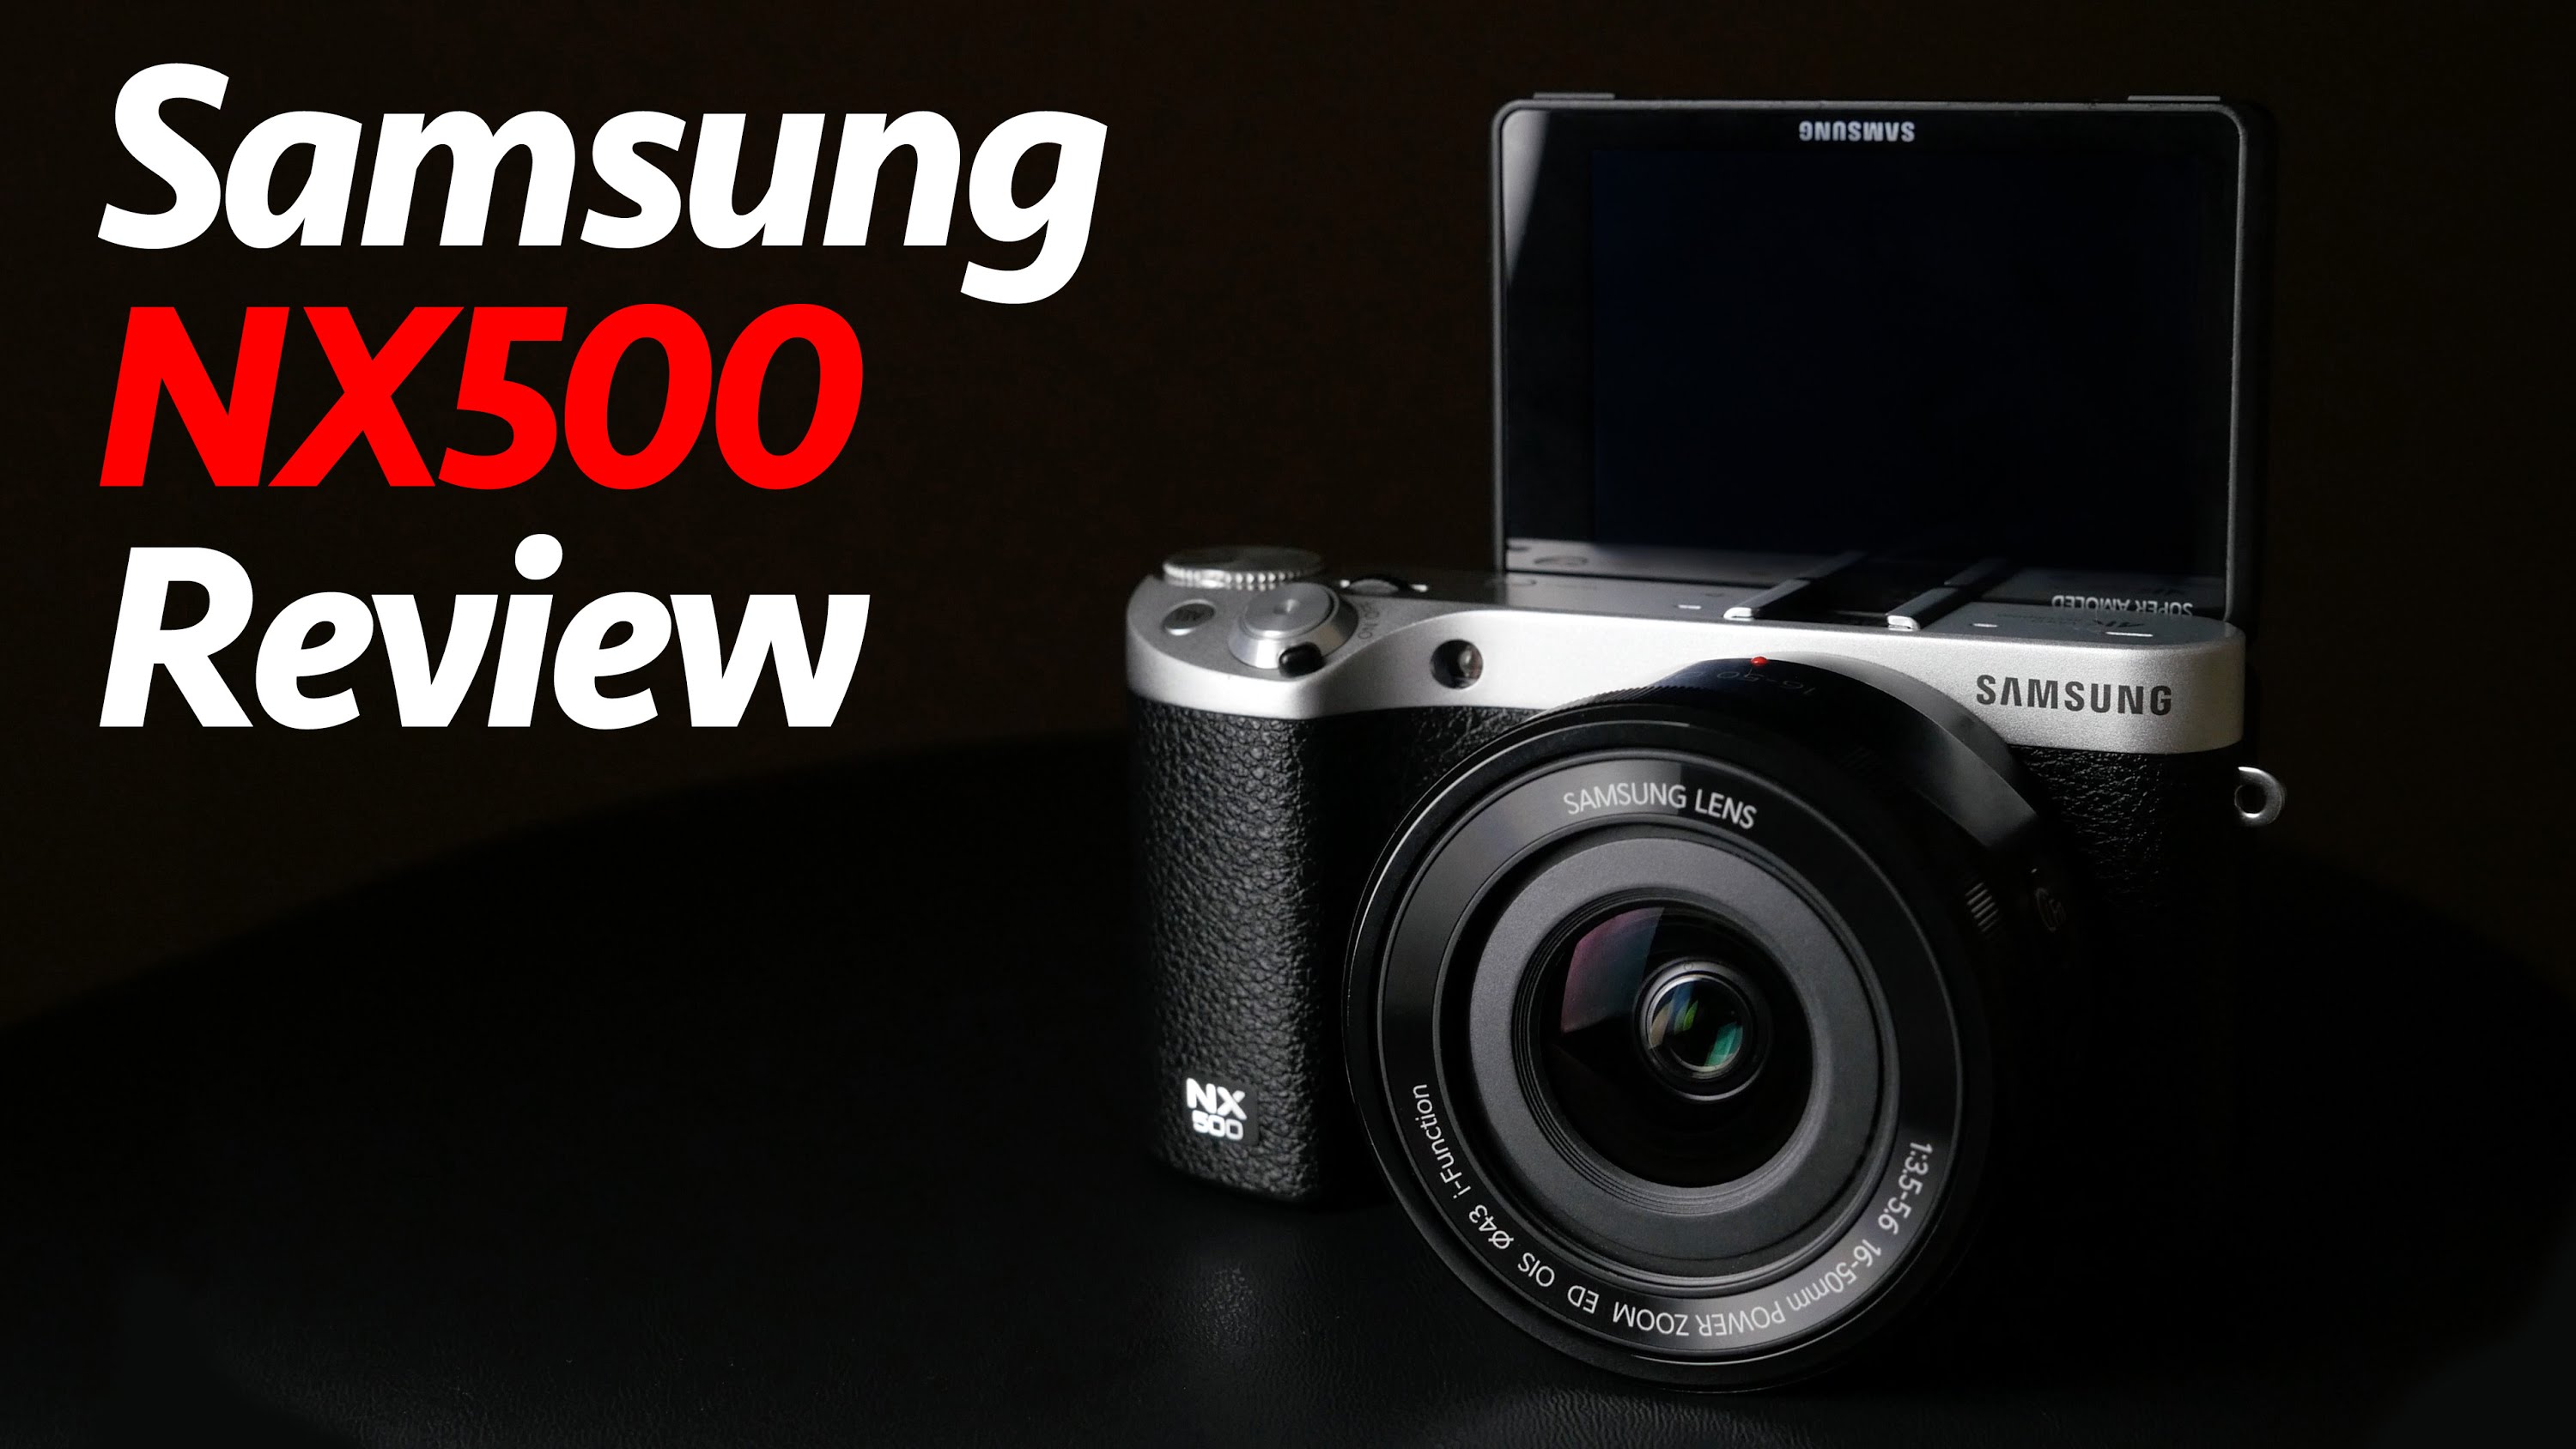 Samsung NX500 Review – Impressive Compact Camera For Photo and 4K Video